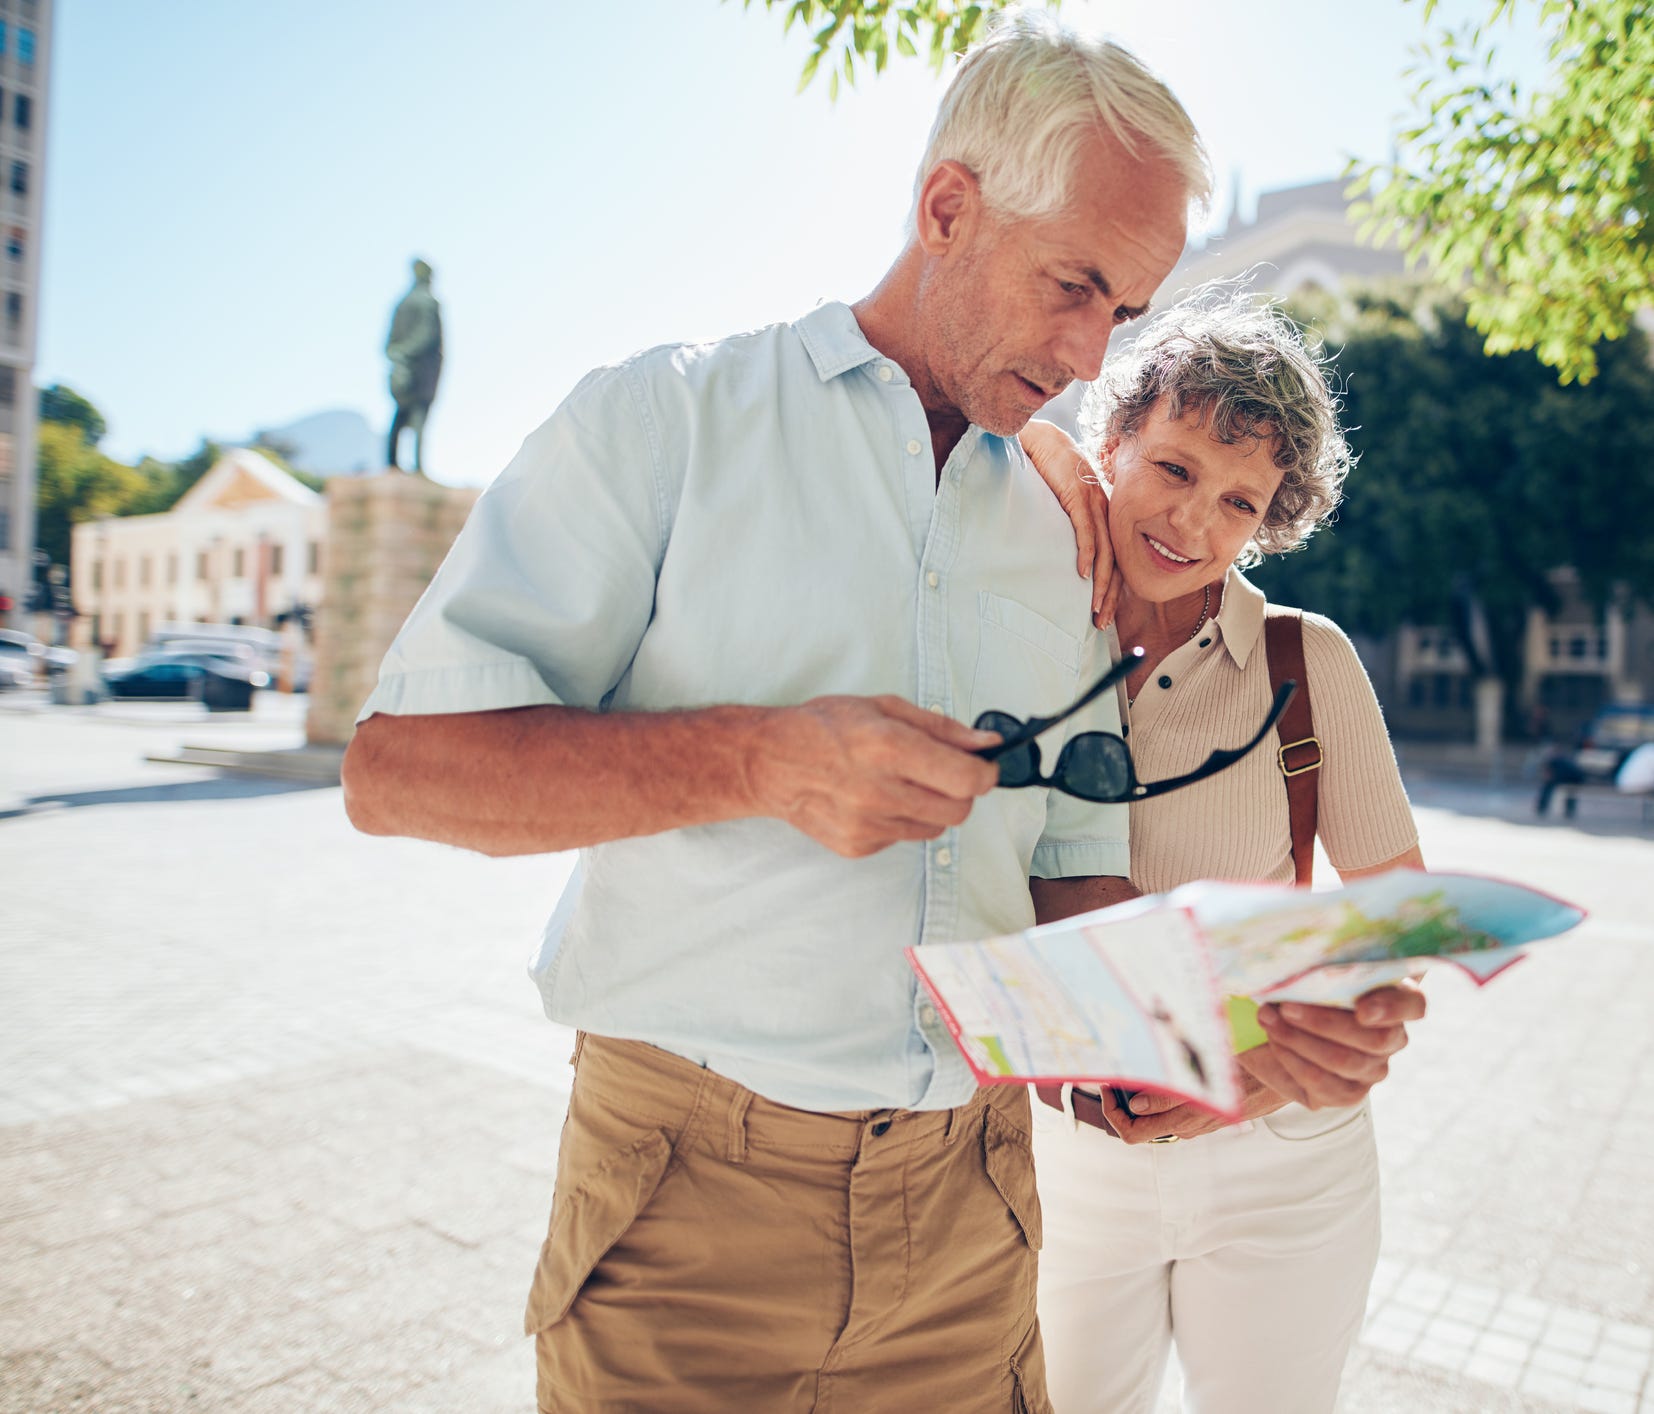 Where is it cheapest to retire? Let's take a quick look to find out how much the average retiree spends in your part of the country.